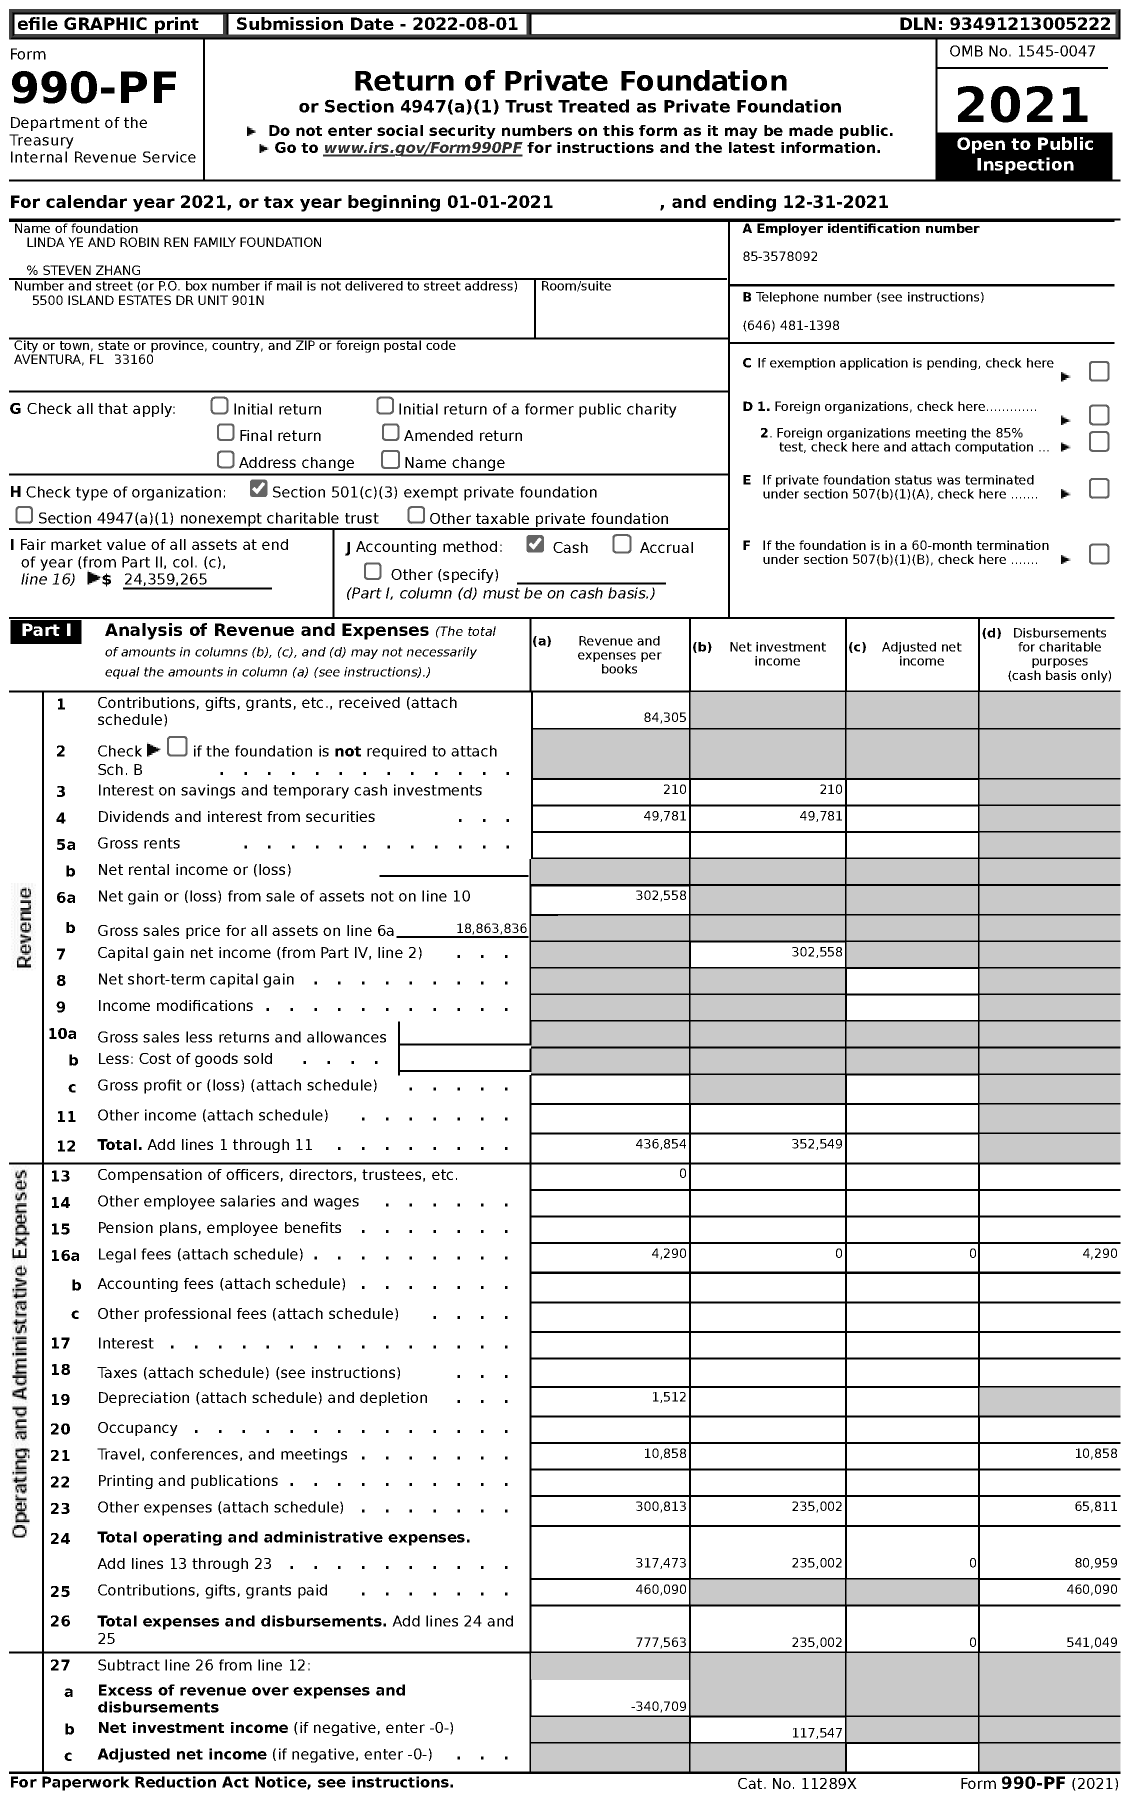 2021 Form 990 for Linda Ye and Robin Ren Family Foundation